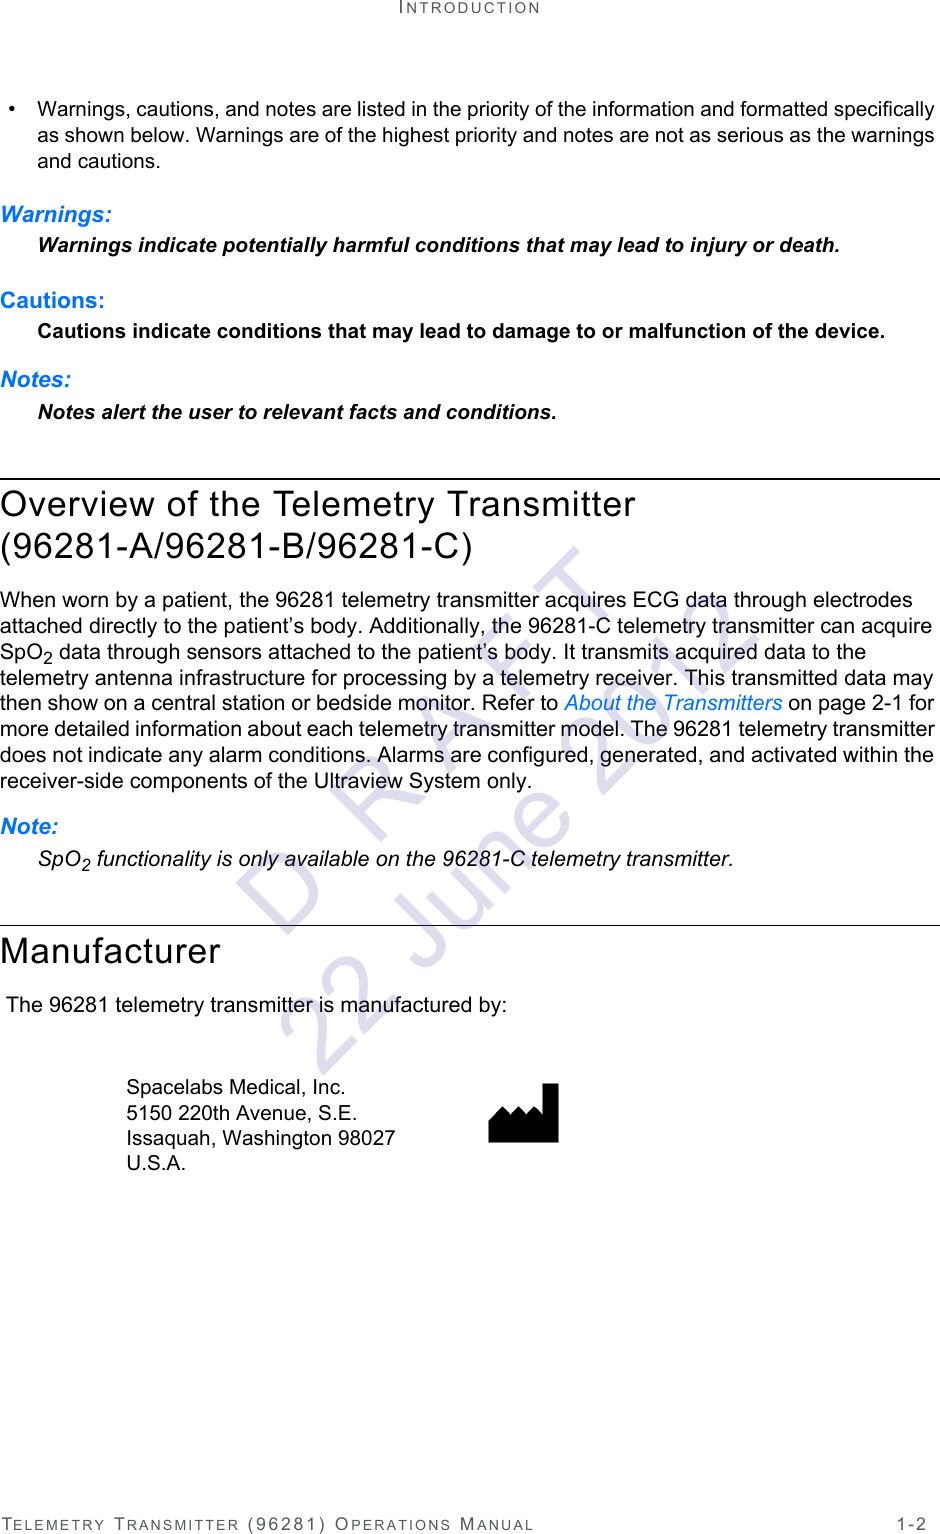 TELEMETRY TRANSMITTER (96281) OPERATIONS MANUAL 1-2INTRODUCTION•Warnings, cautions, and notes are listed in the priority of the information and formatted specifically as shown below. Warnings are of the highest priority and notes are not as serious as the warnings and cautions.Warnings:Warnings indicate potentially harmful conditions that may lead to injury or death.Cautions:Cautions indicate conditions that may lead to damage to or malfunction of the device.Notes:Notes alert the user to relevant facts and conditions.Overview of the Telemetry Transmitter (96281-A/96281-B/96281-C)When worn by a patient, the 96281 telemetry transmitter acquires ECG data through electrodes attached directly to the patient’s body. Additionally, the 96281-C telemetry transmitter can acquire SpO2 data through sensors attached to the patient’s body. It transmits acquired data to the telemetry antenna infrastructure for processing by a telemetry receiver. This transmitted data may then show on a central station or bedside monitor. Refer to About the Transmitters on page 2-1 for more detailed information about each telemetry transmitter model. The 96281 telemetry transmitter does not indicate any alarm conditions. Alarms are configured, generated, and activated within the receiver-side components of the Ultraview System only.Note:SpO2 functionality is only available on the 96281-C telemetry transmitter.Manufacturer The 96281 telemetry transmitter is manufactured by: Spacelabs Medical, Inc. 5150 220th Avenue, S.E. Issaquah, Washington 98027 U.S.A. D  R A F T 22 June 2012